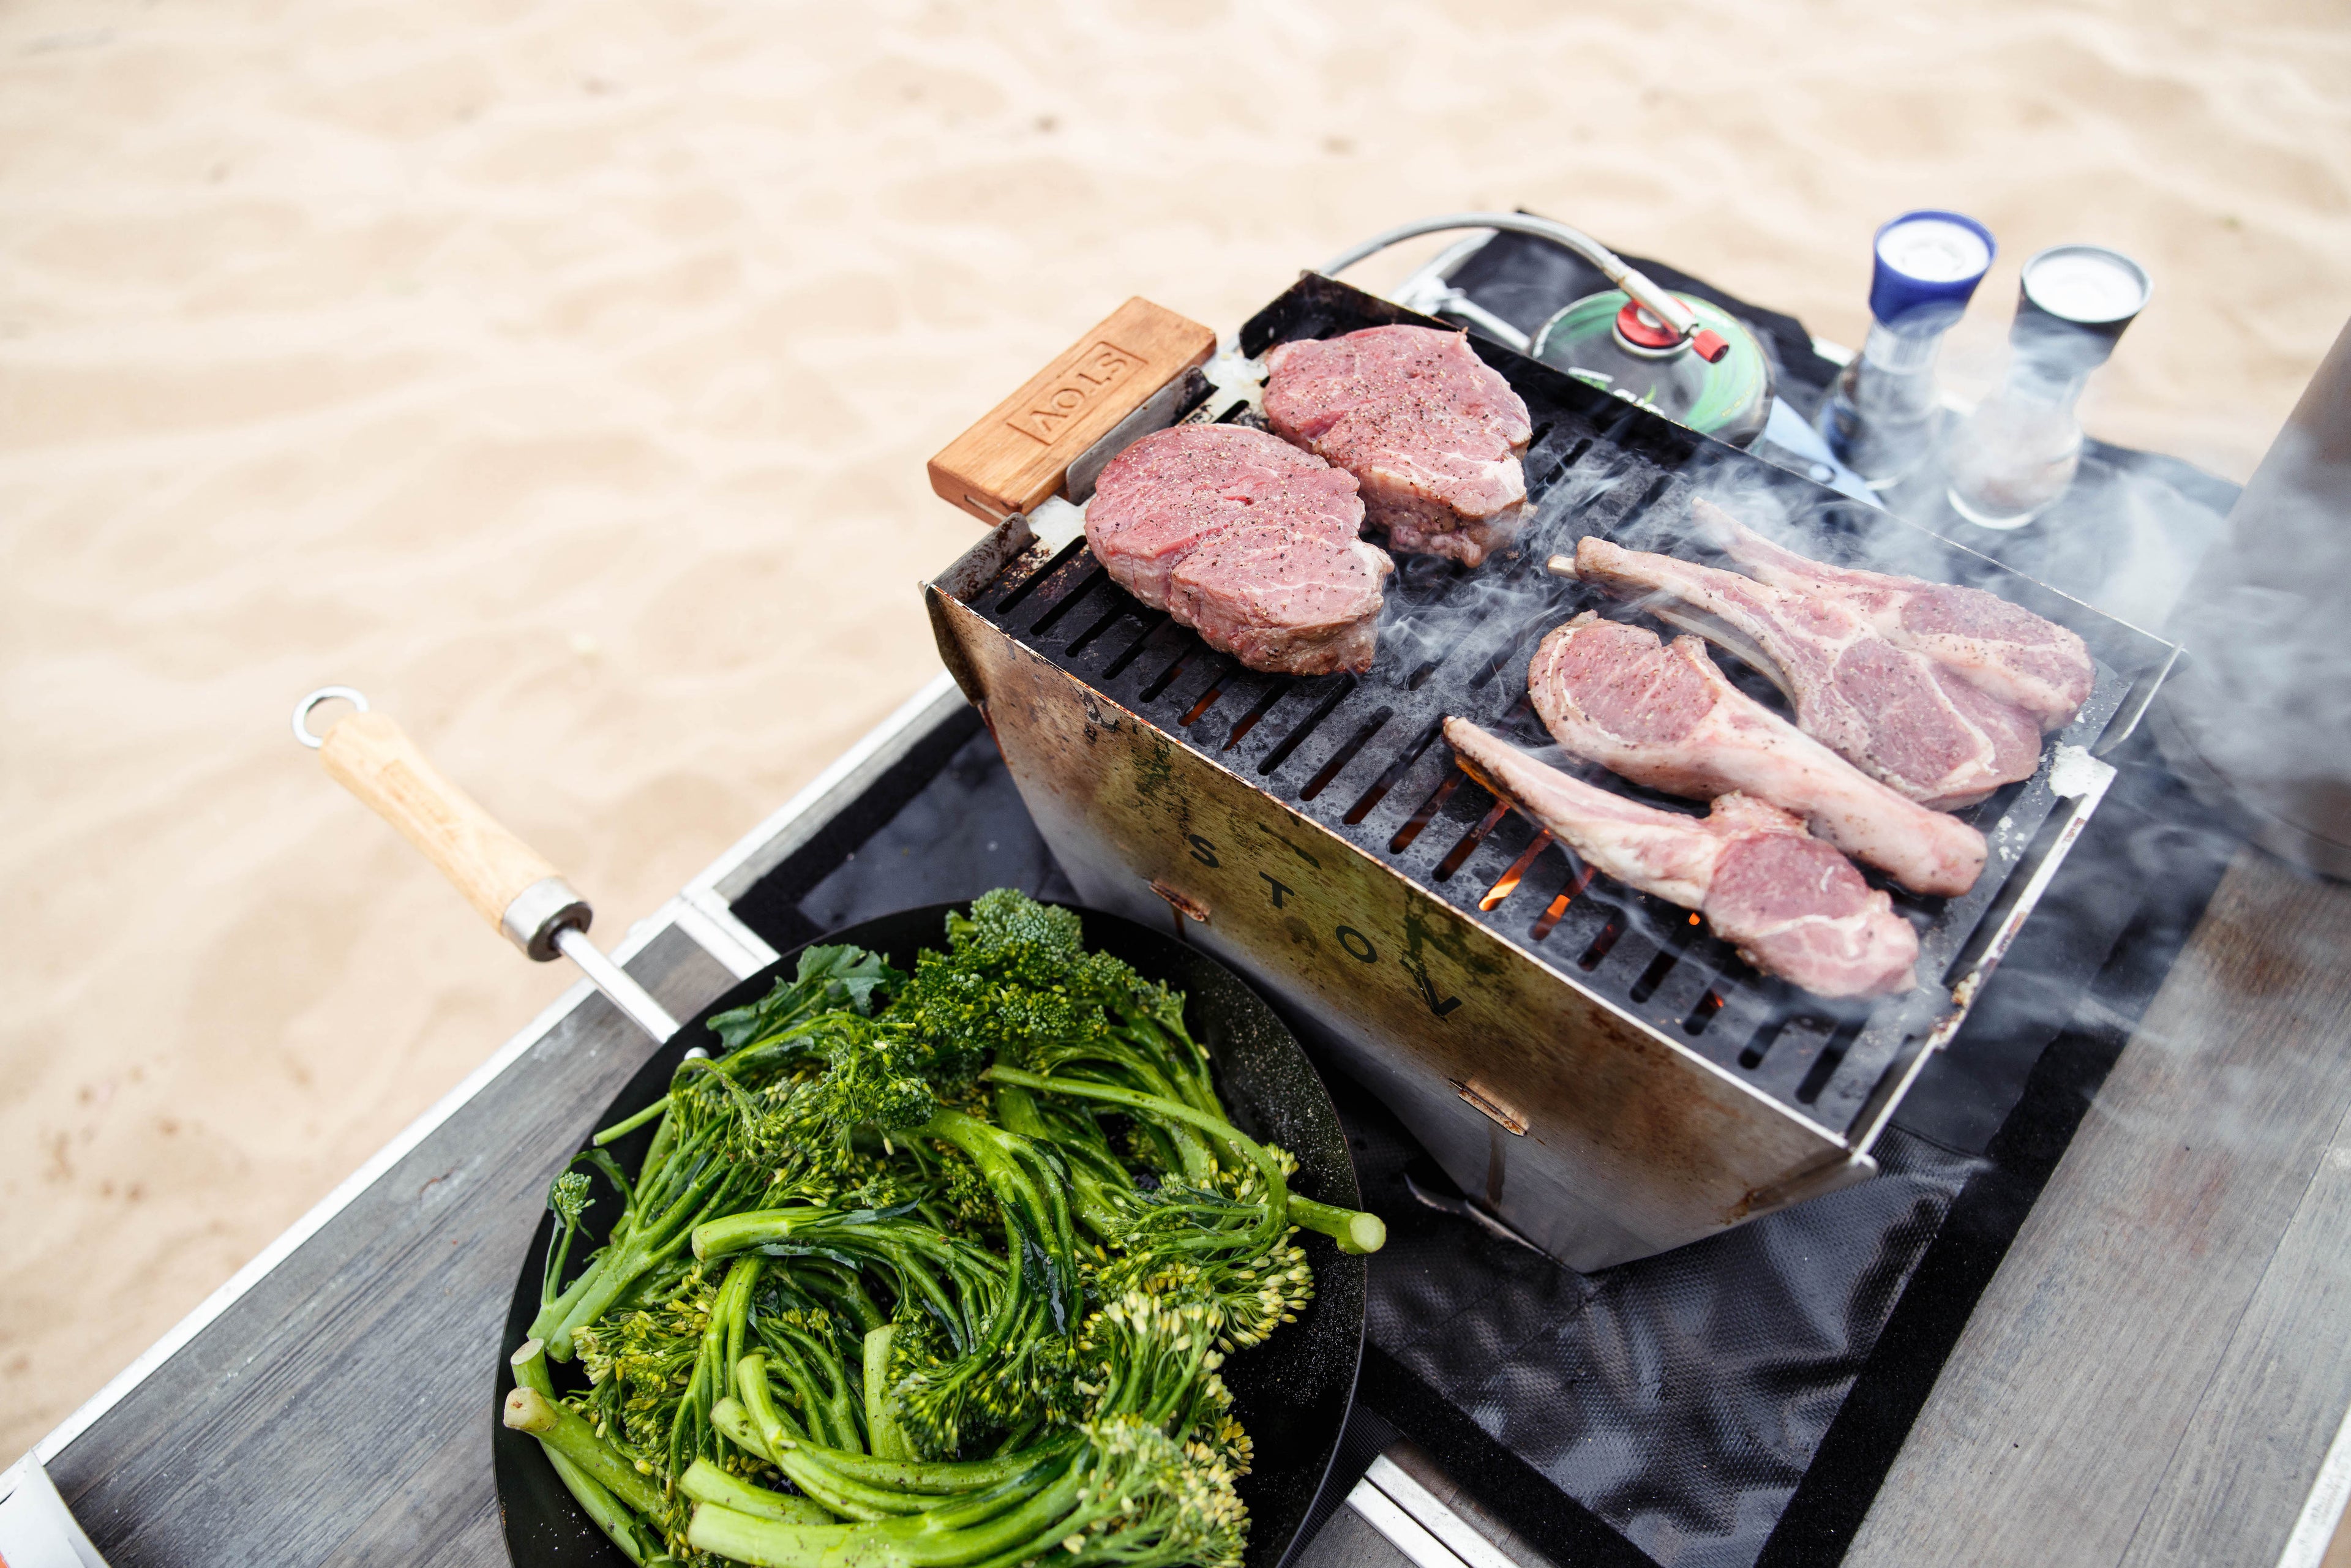 Reviews from satisfied customers and family. These great portable BBQs fulfil all grilling needs.